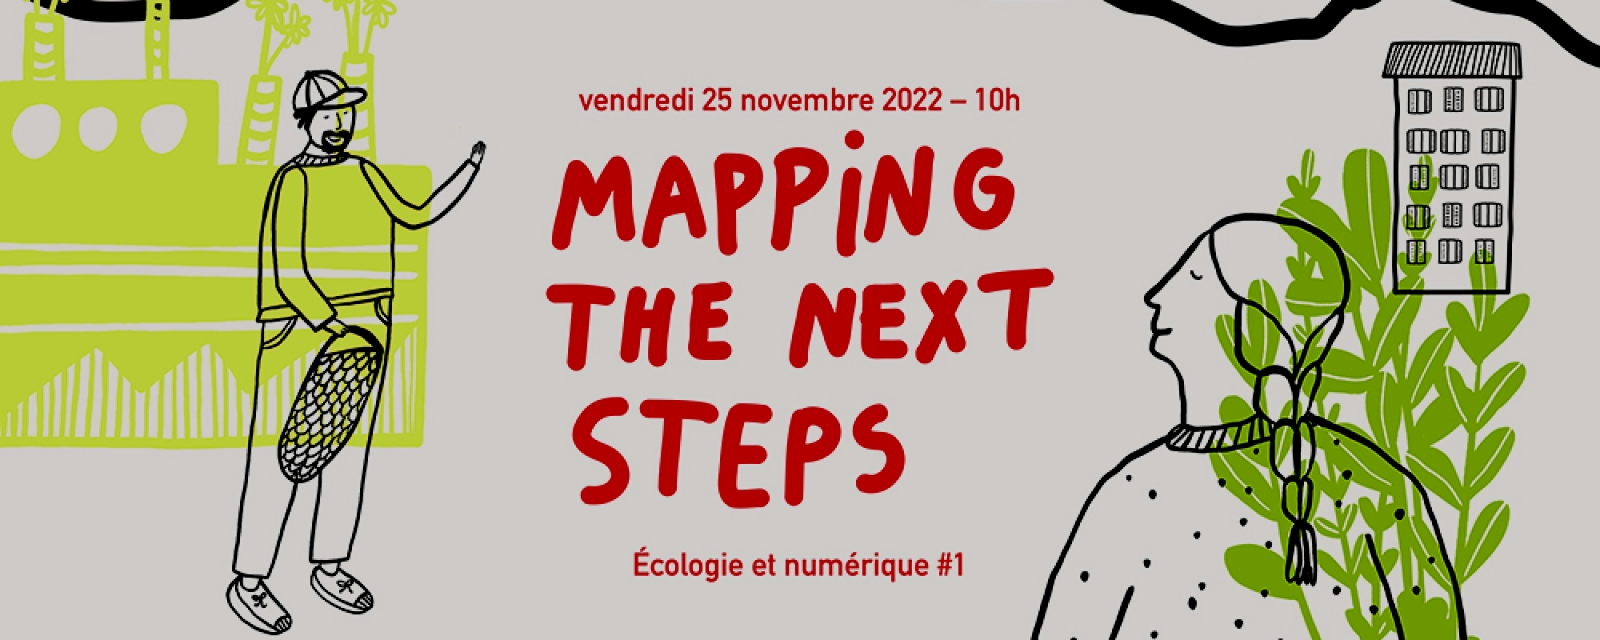 mapping-the-next-steps-ecologie-novembre-2022